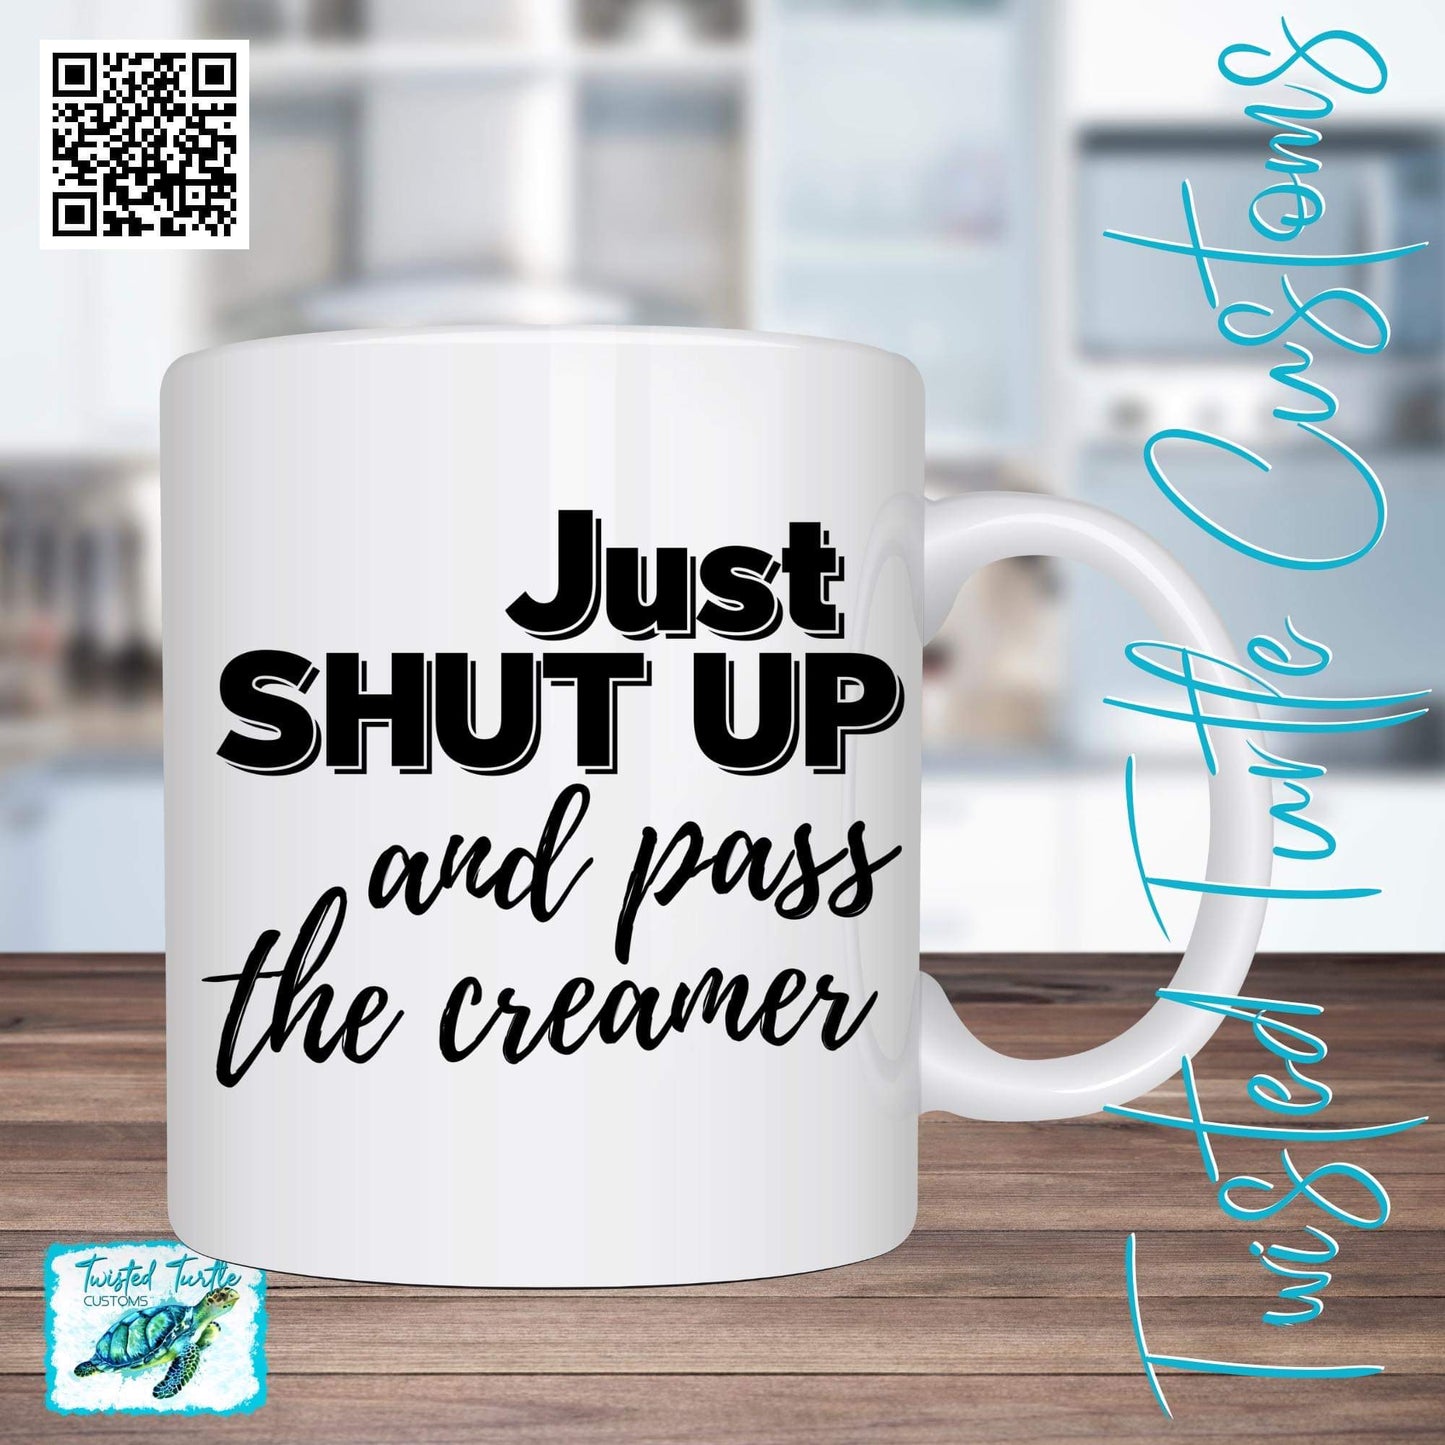 Funny Coffee Mug “Just Shut Up and pass the Creamer” for those like like a little coffee with their creamer